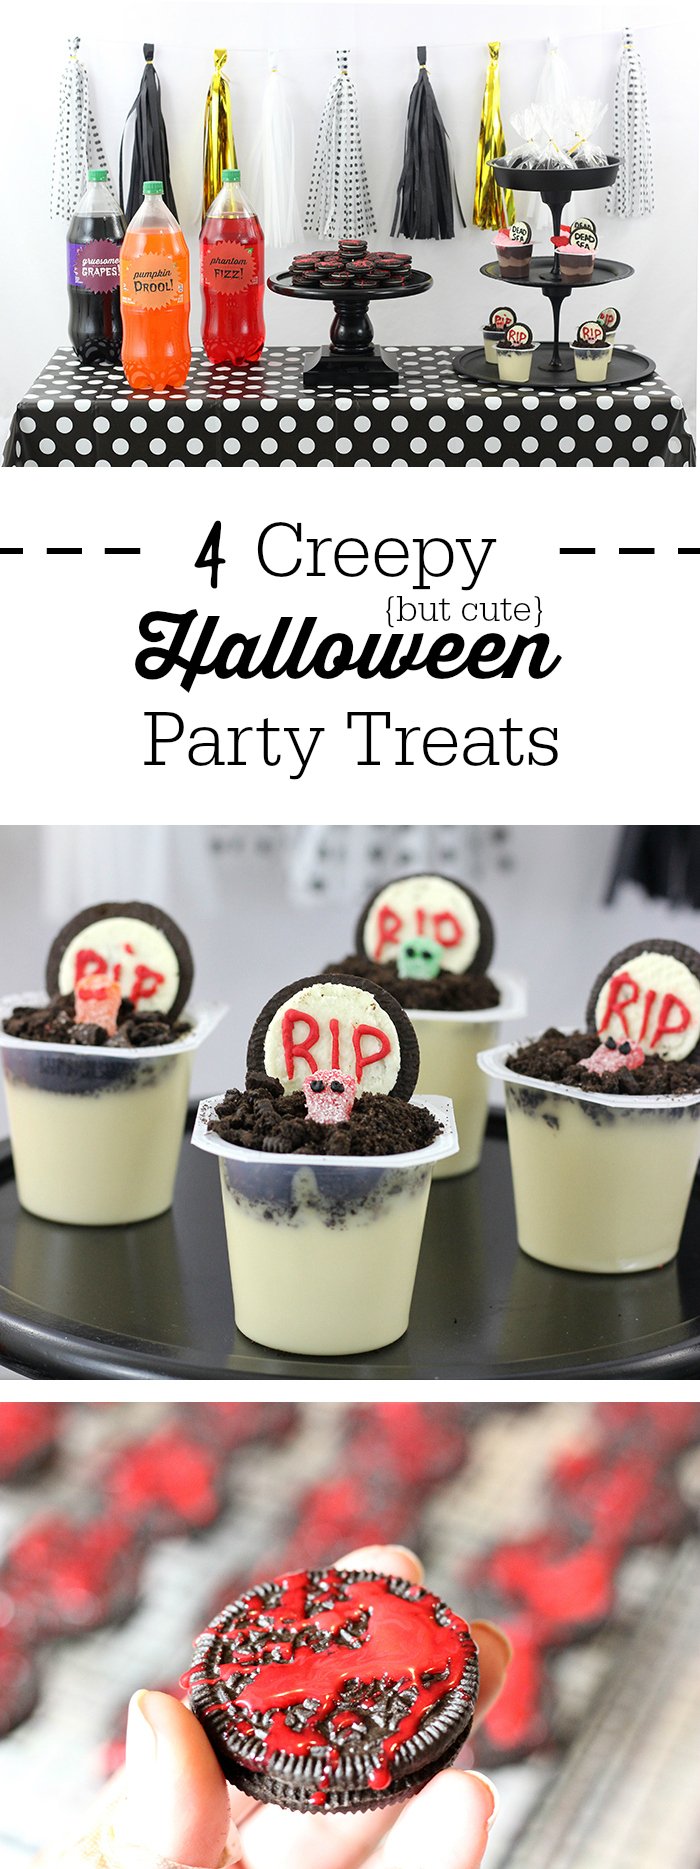 Creepy Halloween Party Treats. From haunted pudding cups, to blood spattered OREO cookies and more. Make Dead Sea Pudding Cups with OREO, Sour Patch Kids and Snack Pack Pudding Cups.